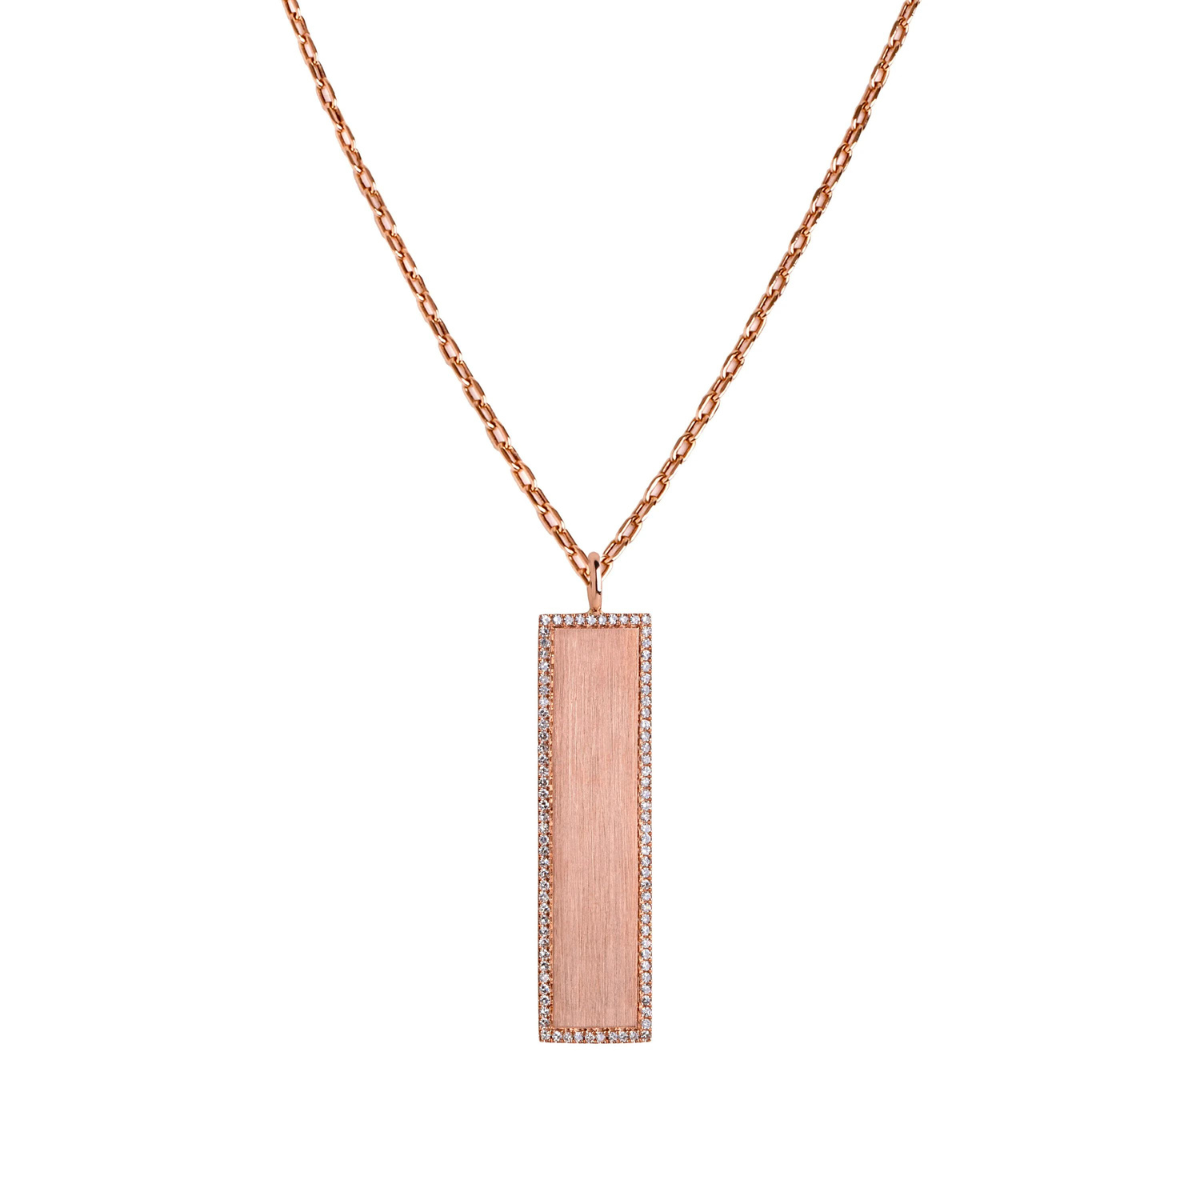 Bridget King Dog Tag Pendant with White Diamonds in Rose Gold - Engraving Available